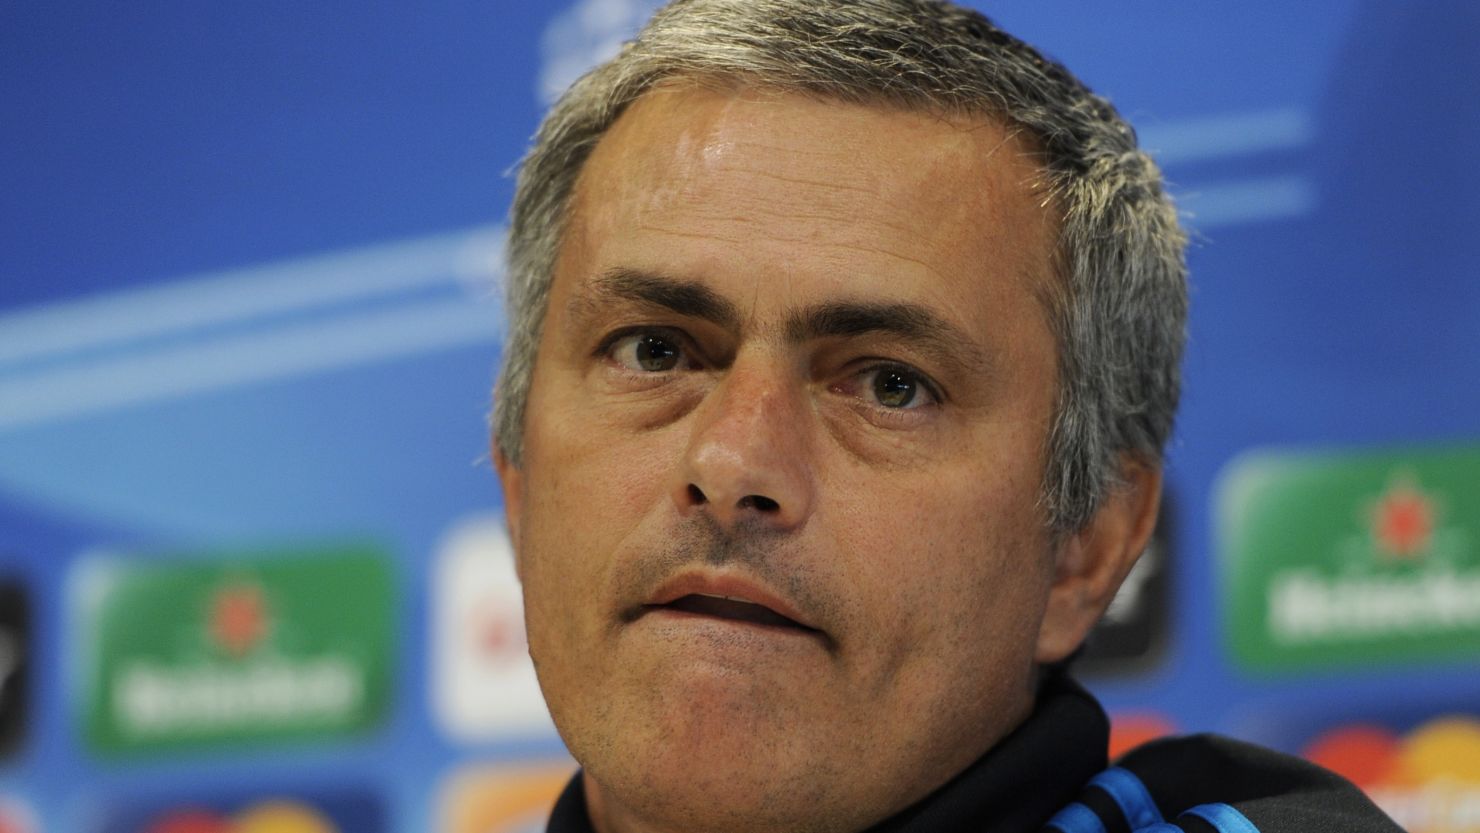 Jose Mourinho believes Barcelona will beat his former side Chelsea in the semifinals of the Champions League.